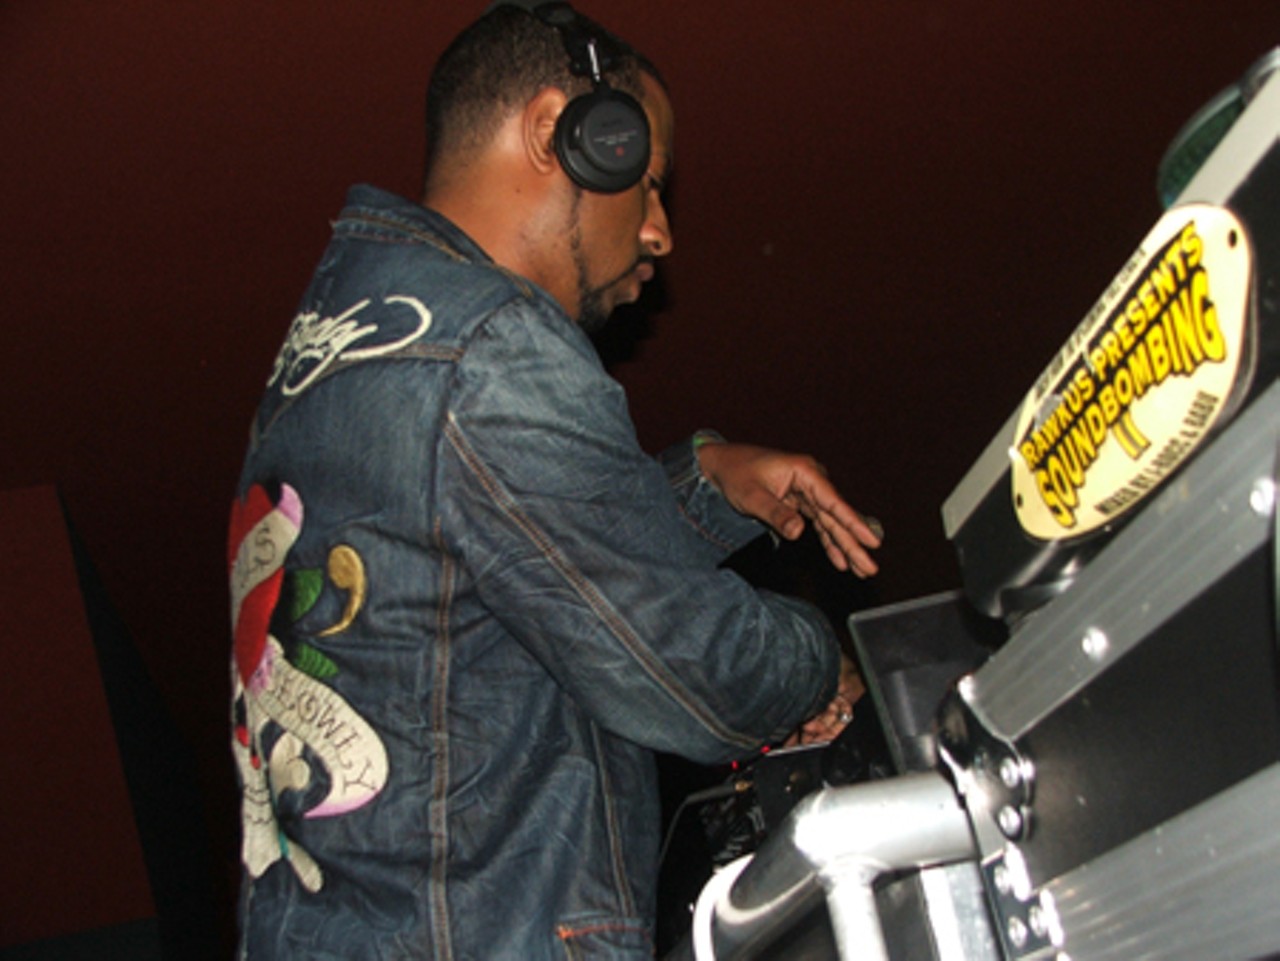 Madlib began his set by feeling out the turntables and some rudimentary scratches that stretched into long "whoook-whooks" as the set continued.